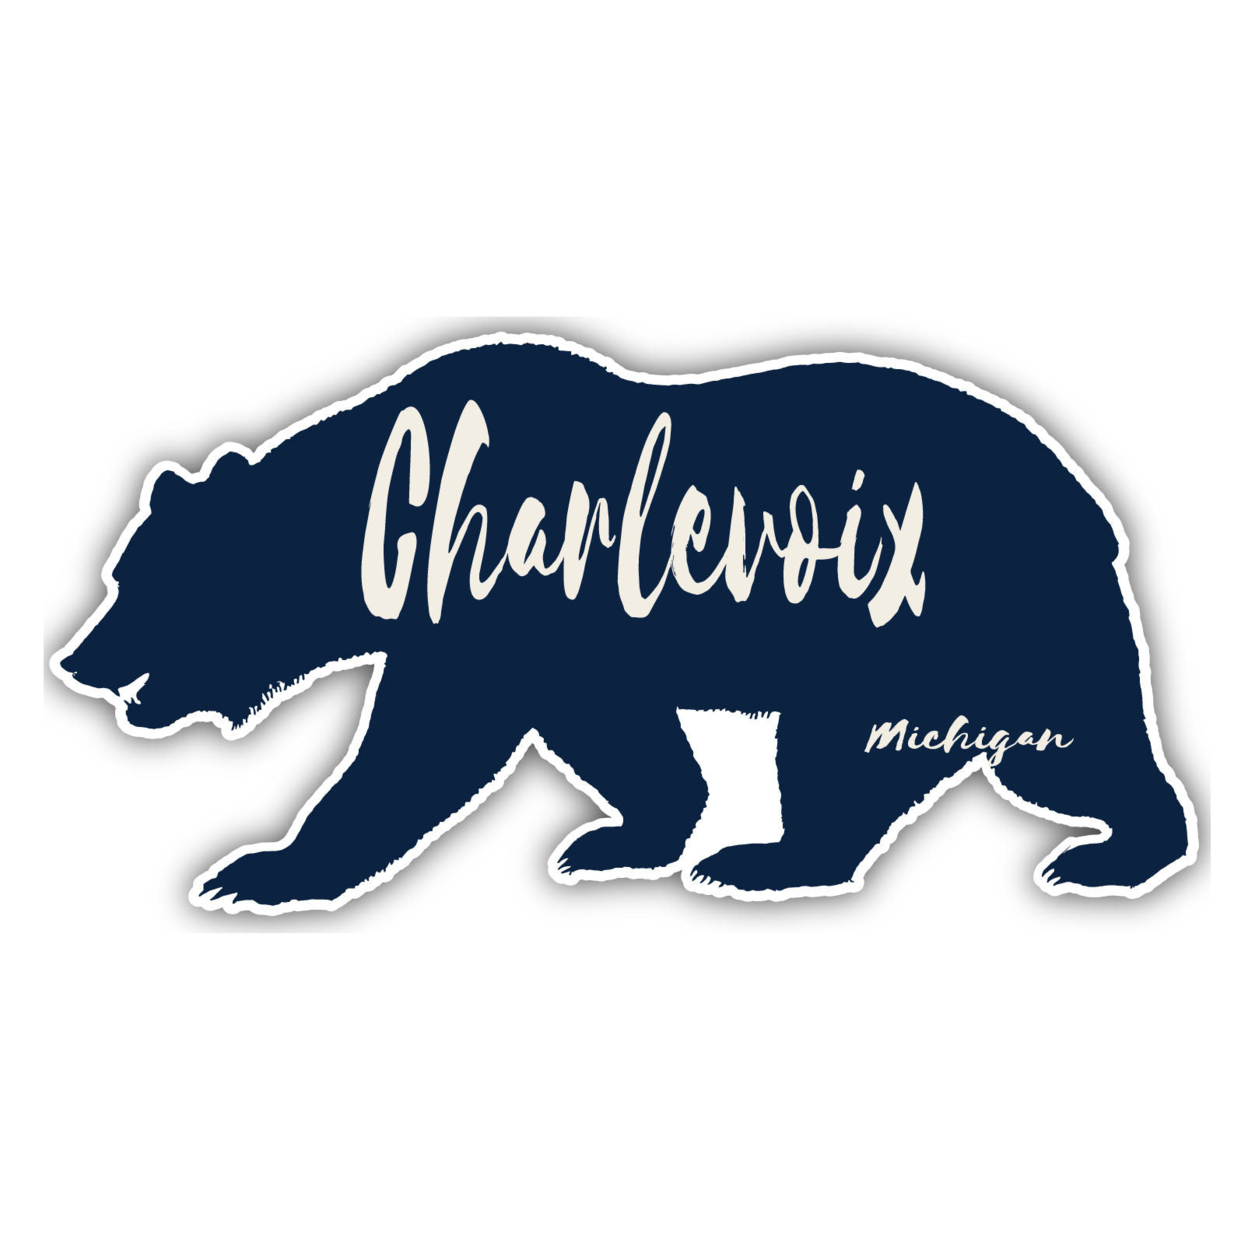 Charlevoix Michigan Souvenir Decorative Stickers (Choose Theme And Size) - 4-Pack, 4-Inch, Bear